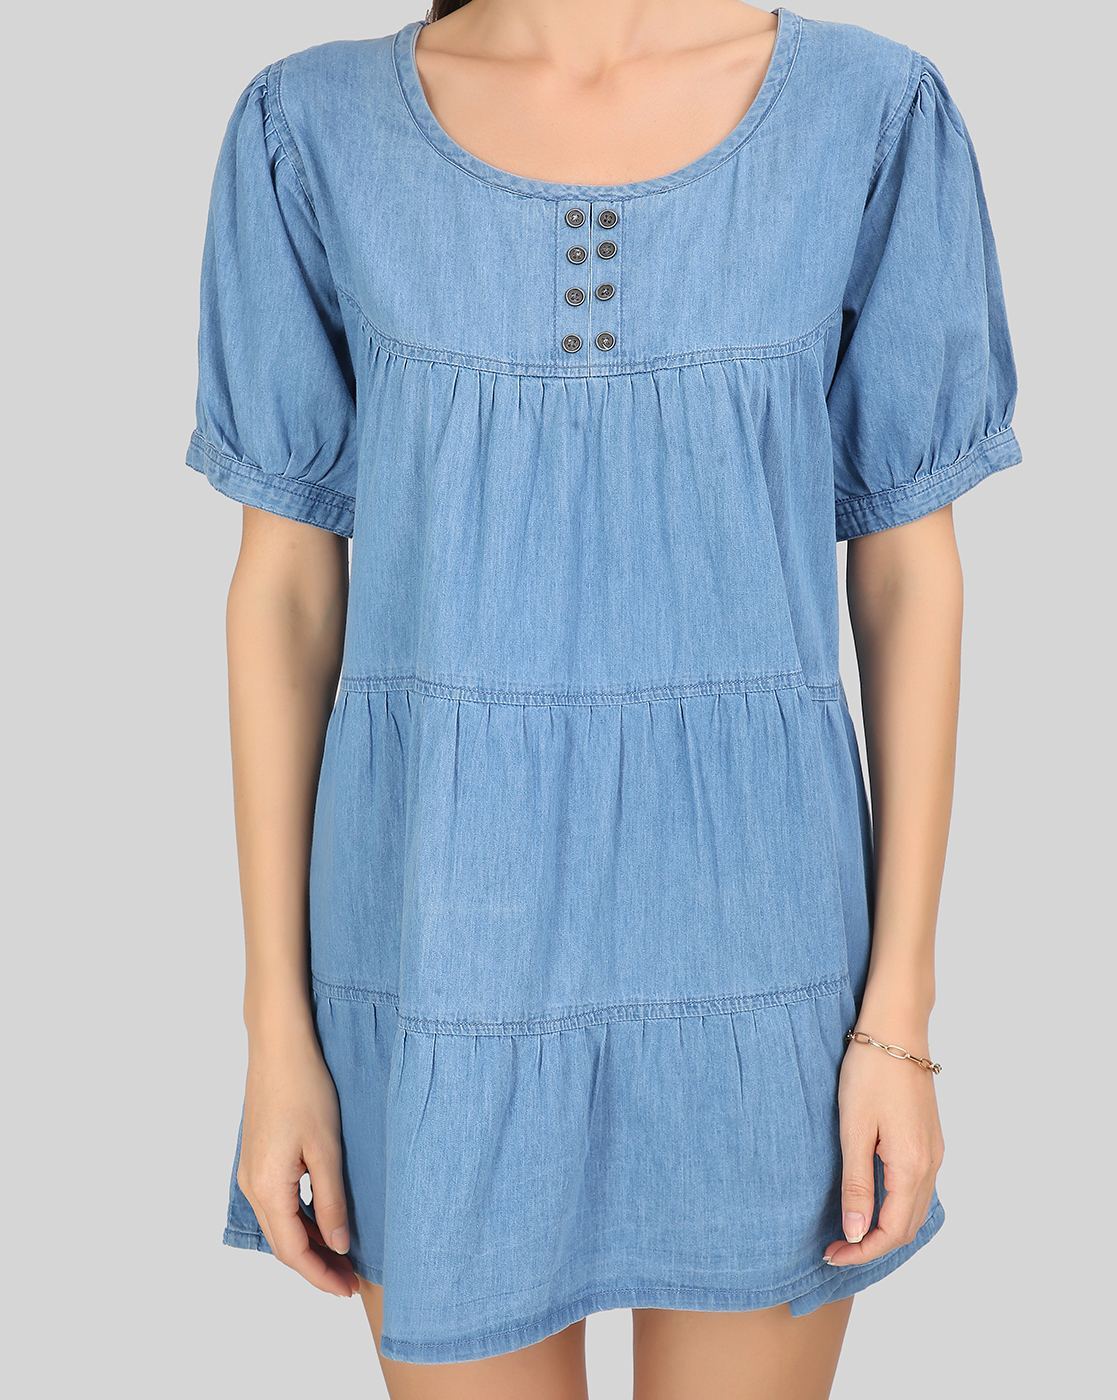 Hope In A line Denim Babydoll Dress (Small) at Amazon Women's Clothing store